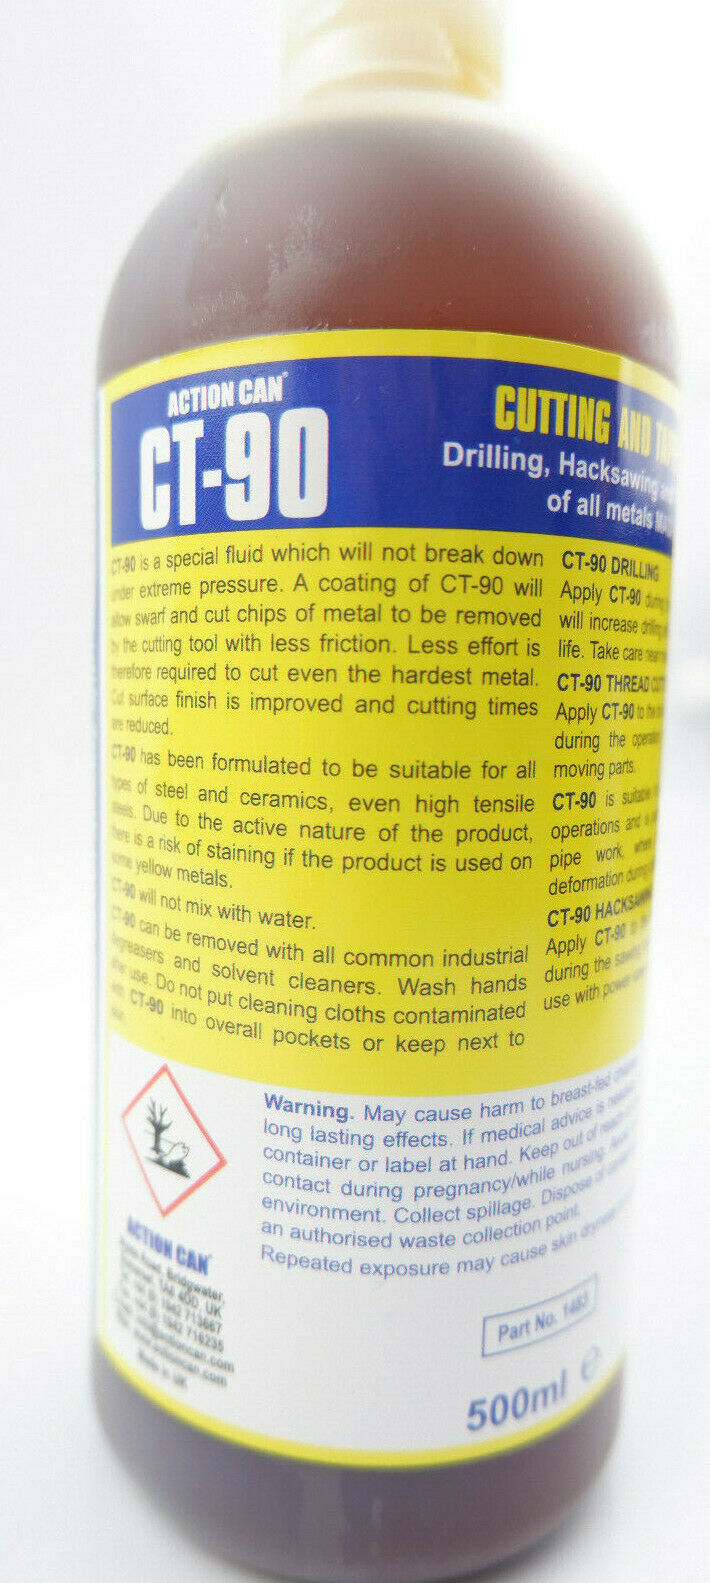 1 bottle of CT-90 Fluid and 1 Tin of CT-90 Compound cutting and tapping solution